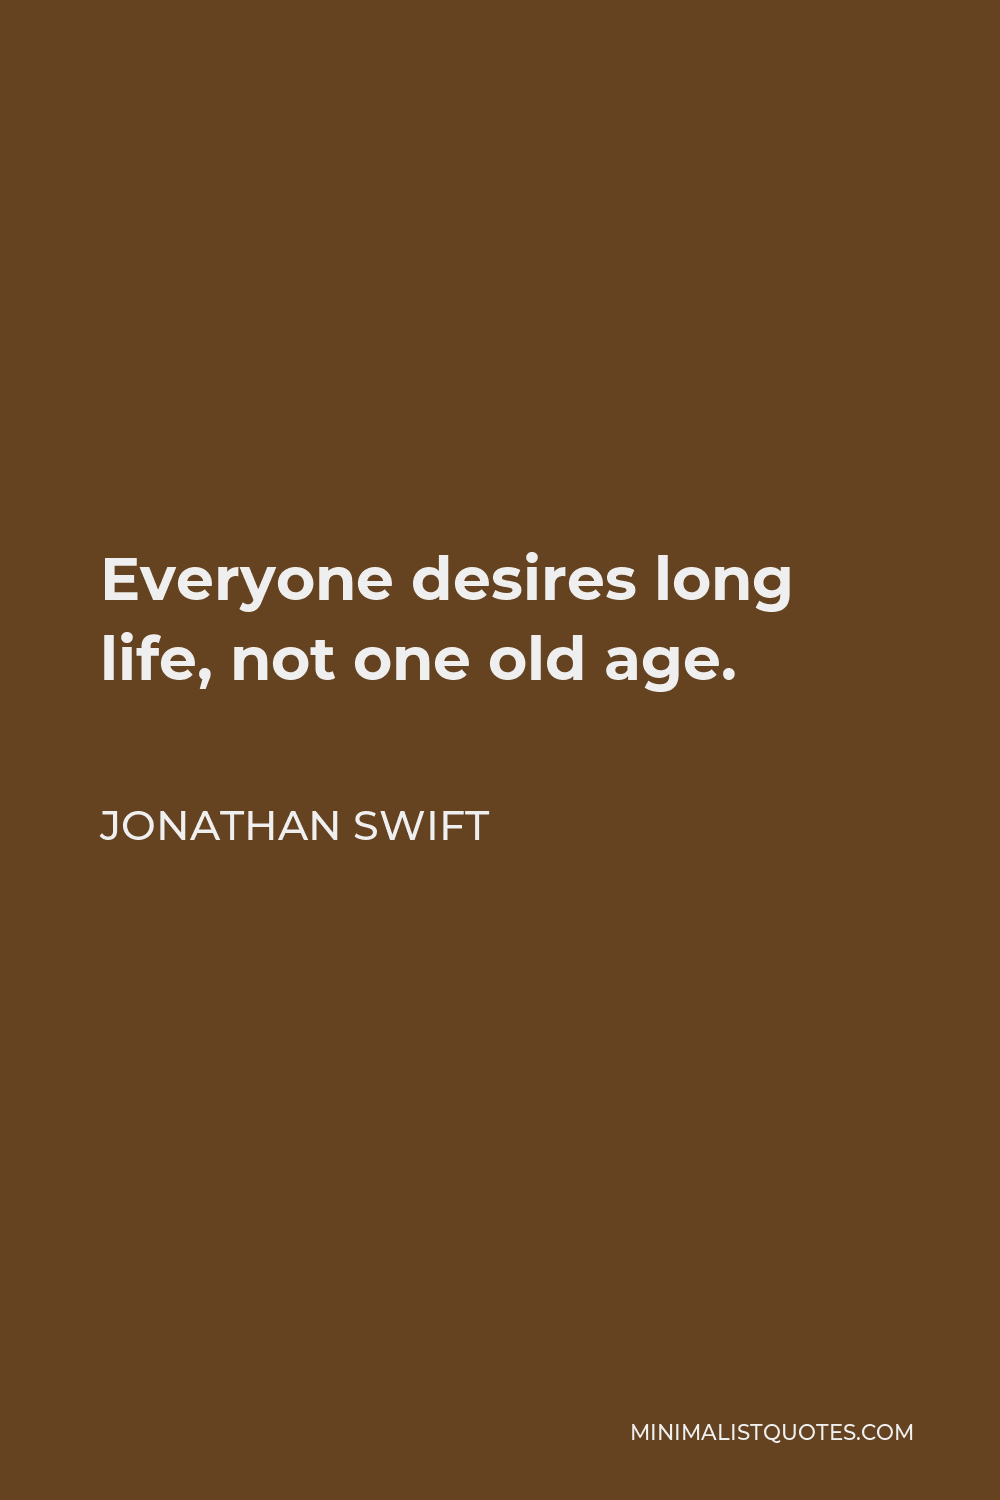 Jonathan Swift Quote - Everyone desires long life, not one old age.